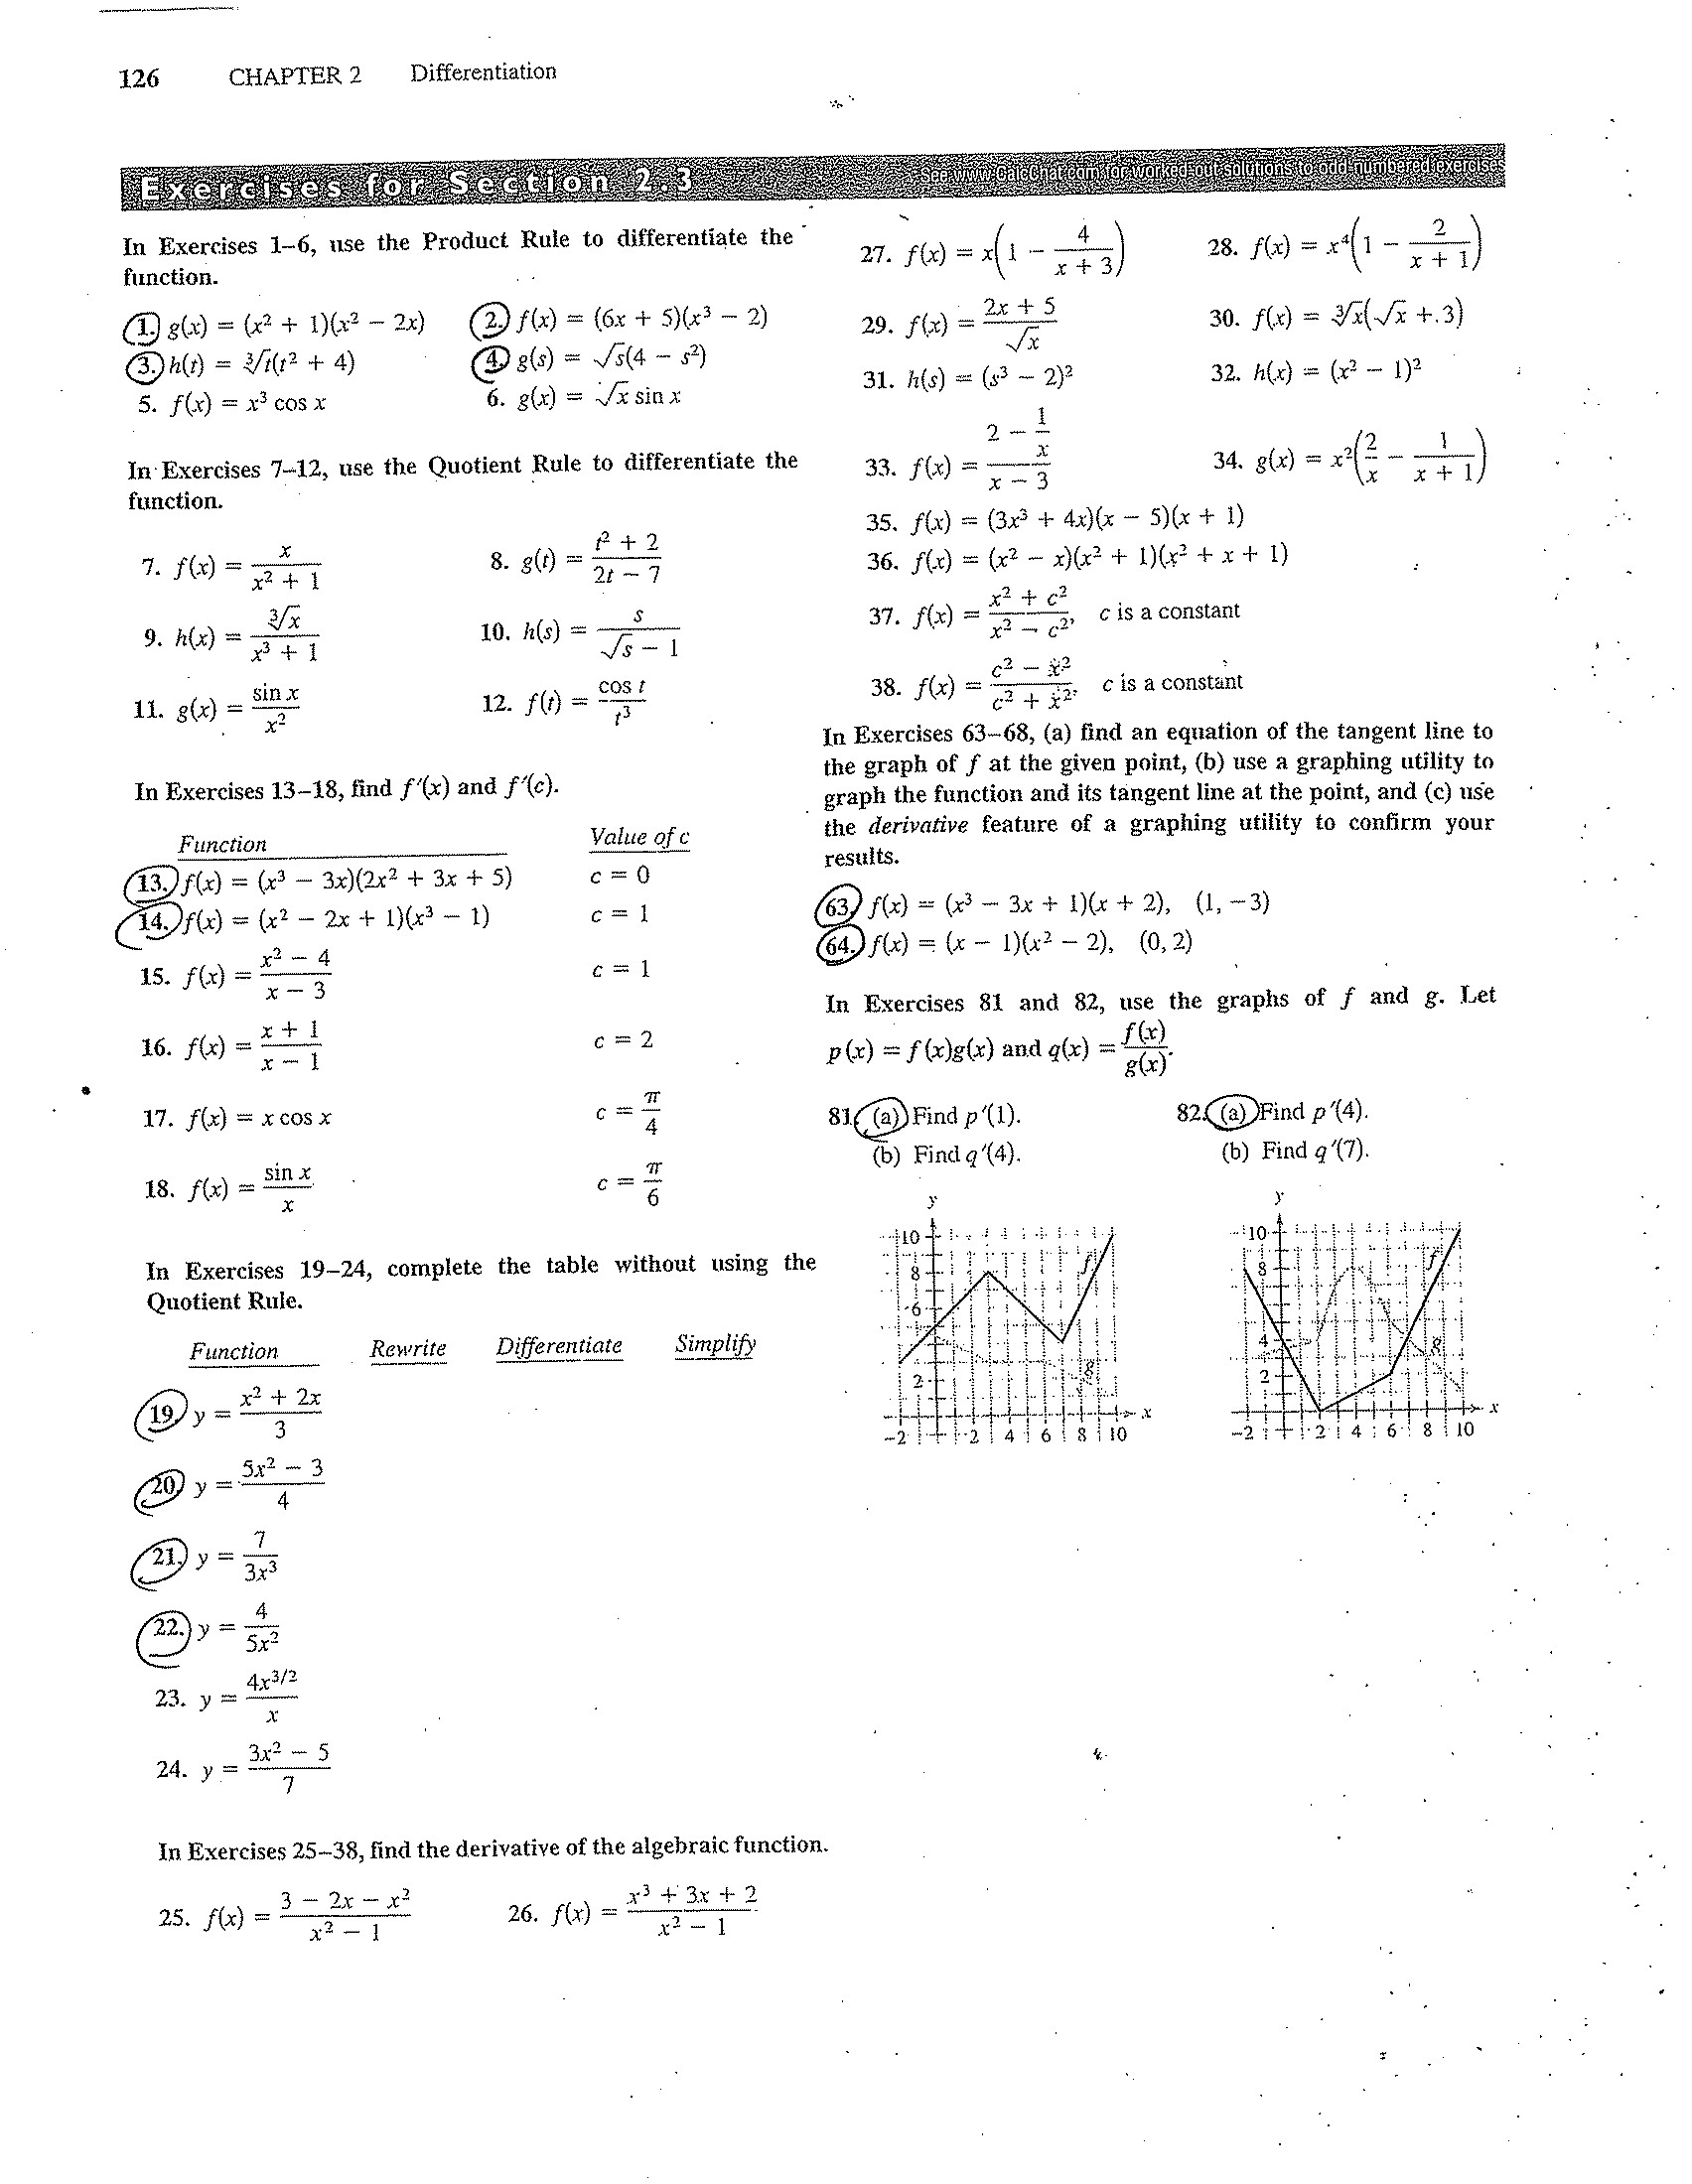 Product and Quotient Rule Worksheet Week Of November 29 December 3 Class Monday Tuesday